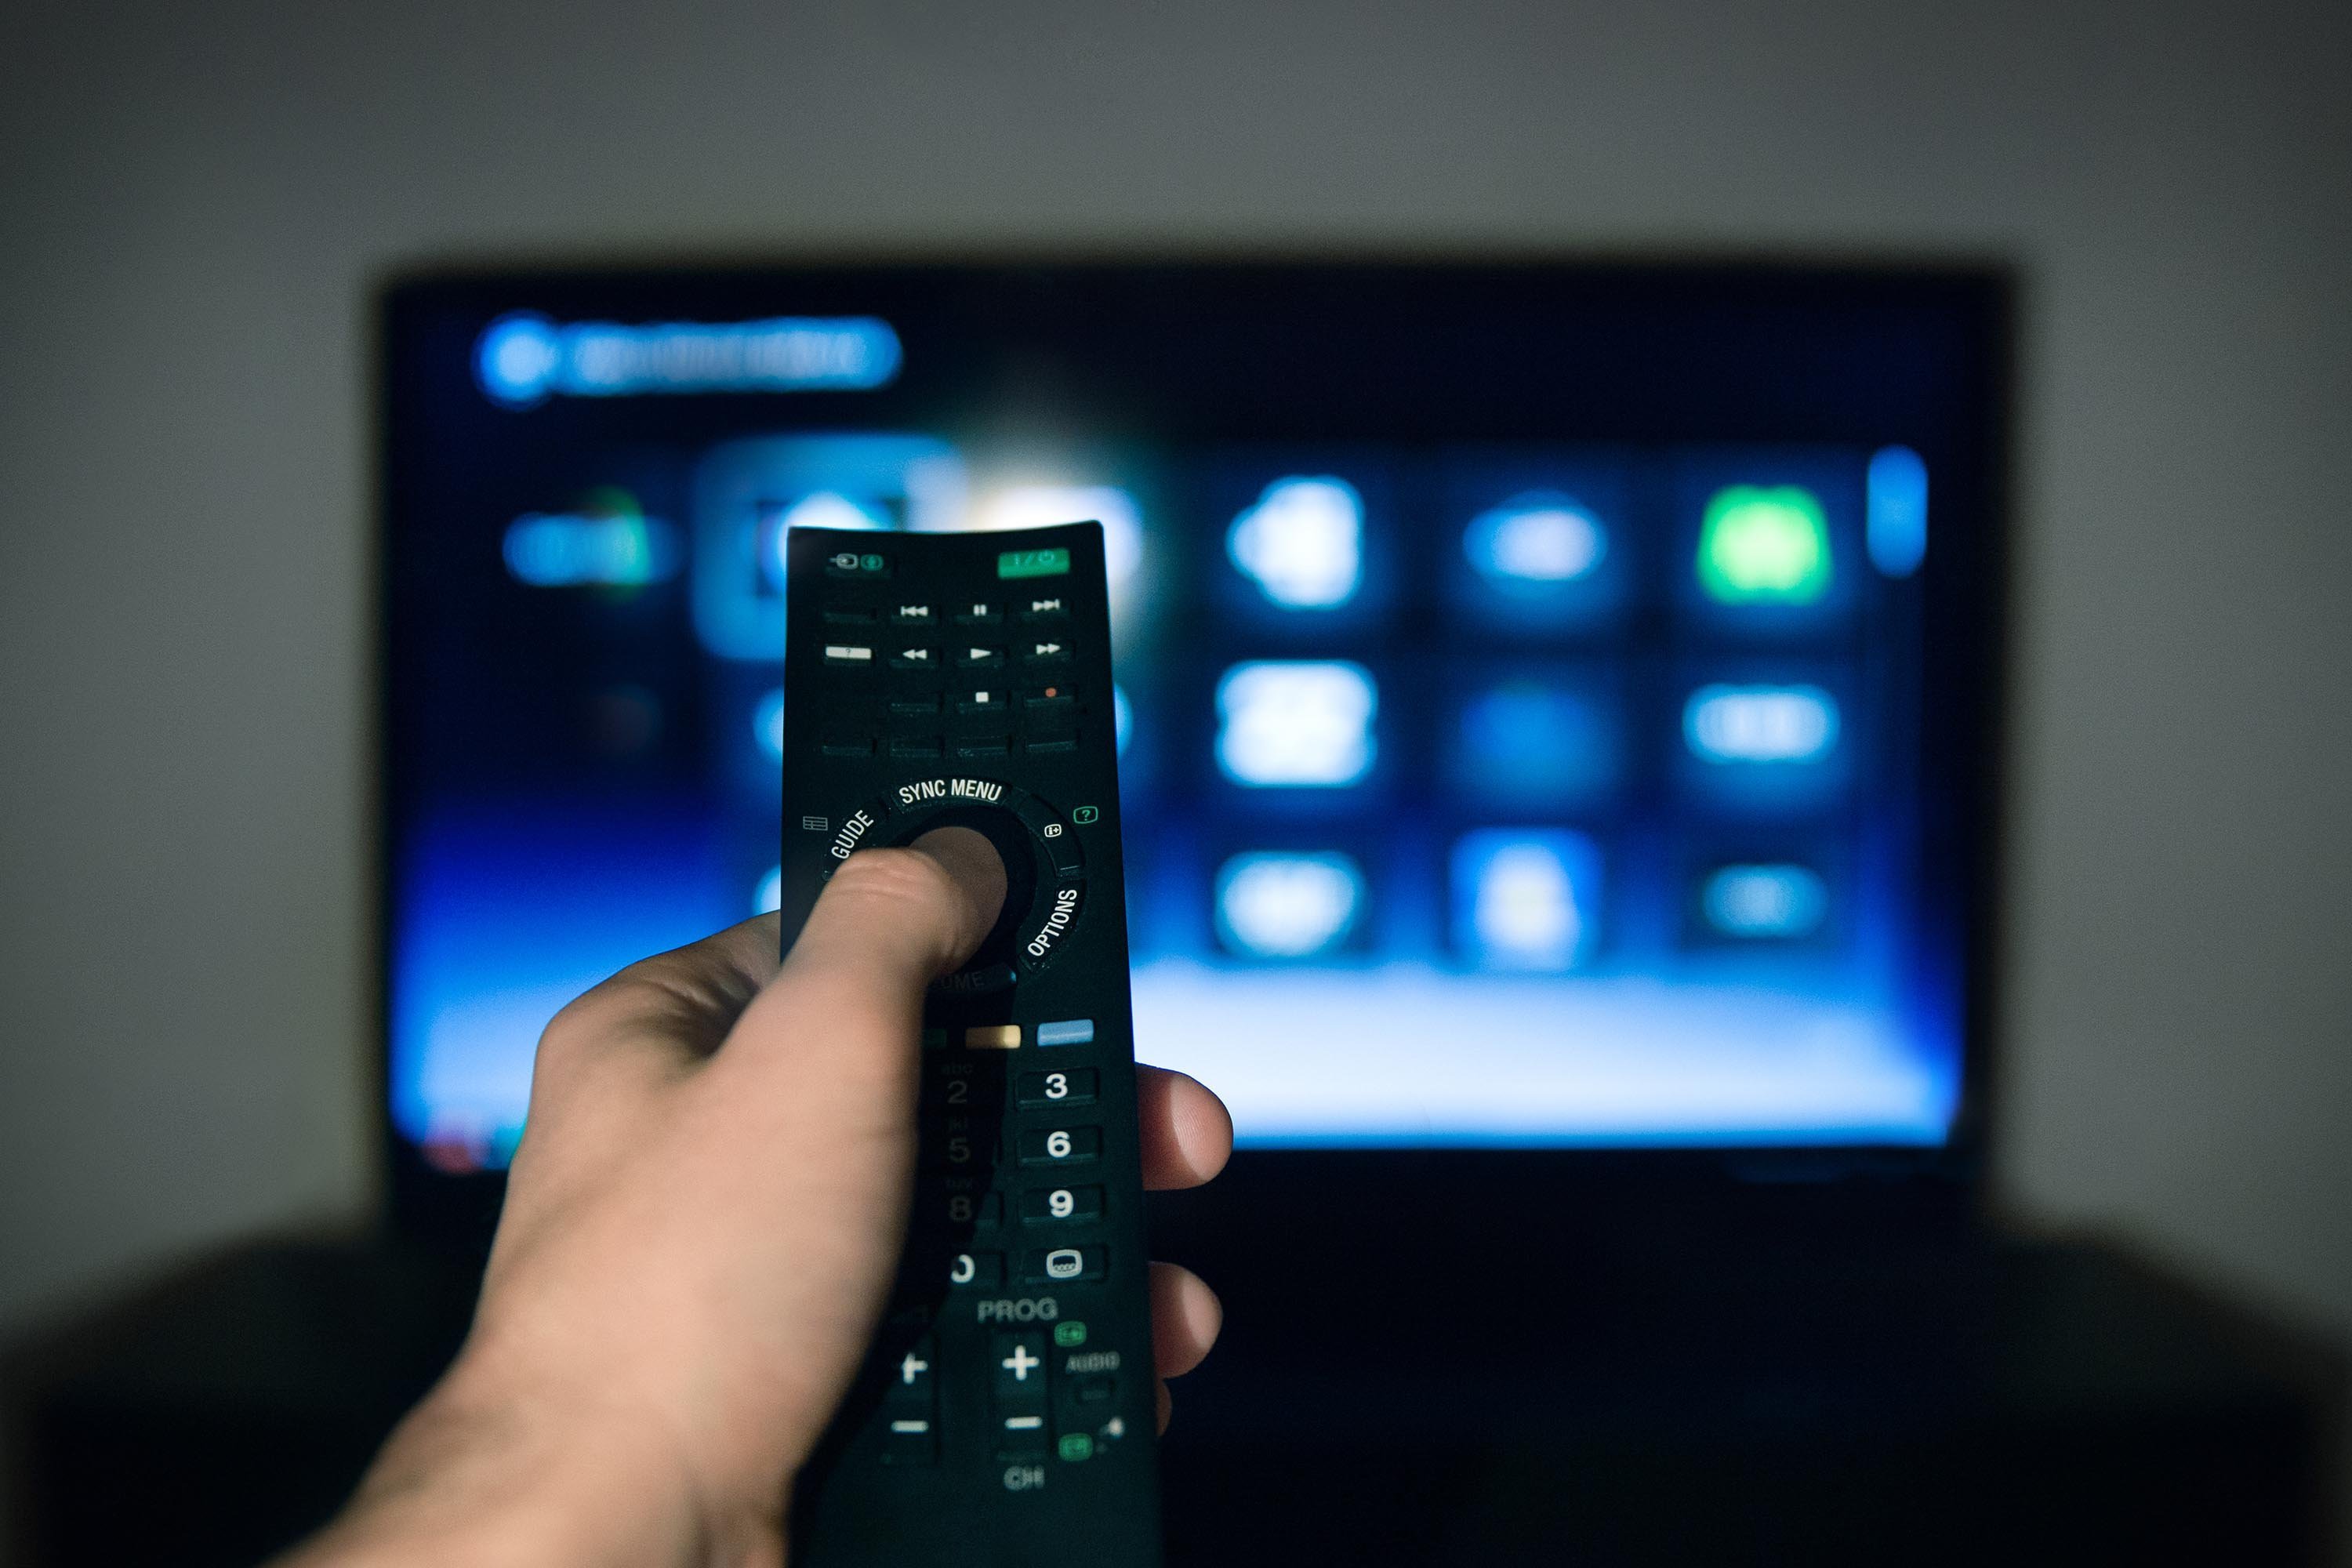 In a pre-holiday message to consumers, an FBI field office is warning that "smart TVs" -- televisions equipped with internet streaming and facial recognition capabilities -- may be vulnerable to intrusion. (Credit: Images by Fabio/Moment RF/Getty)